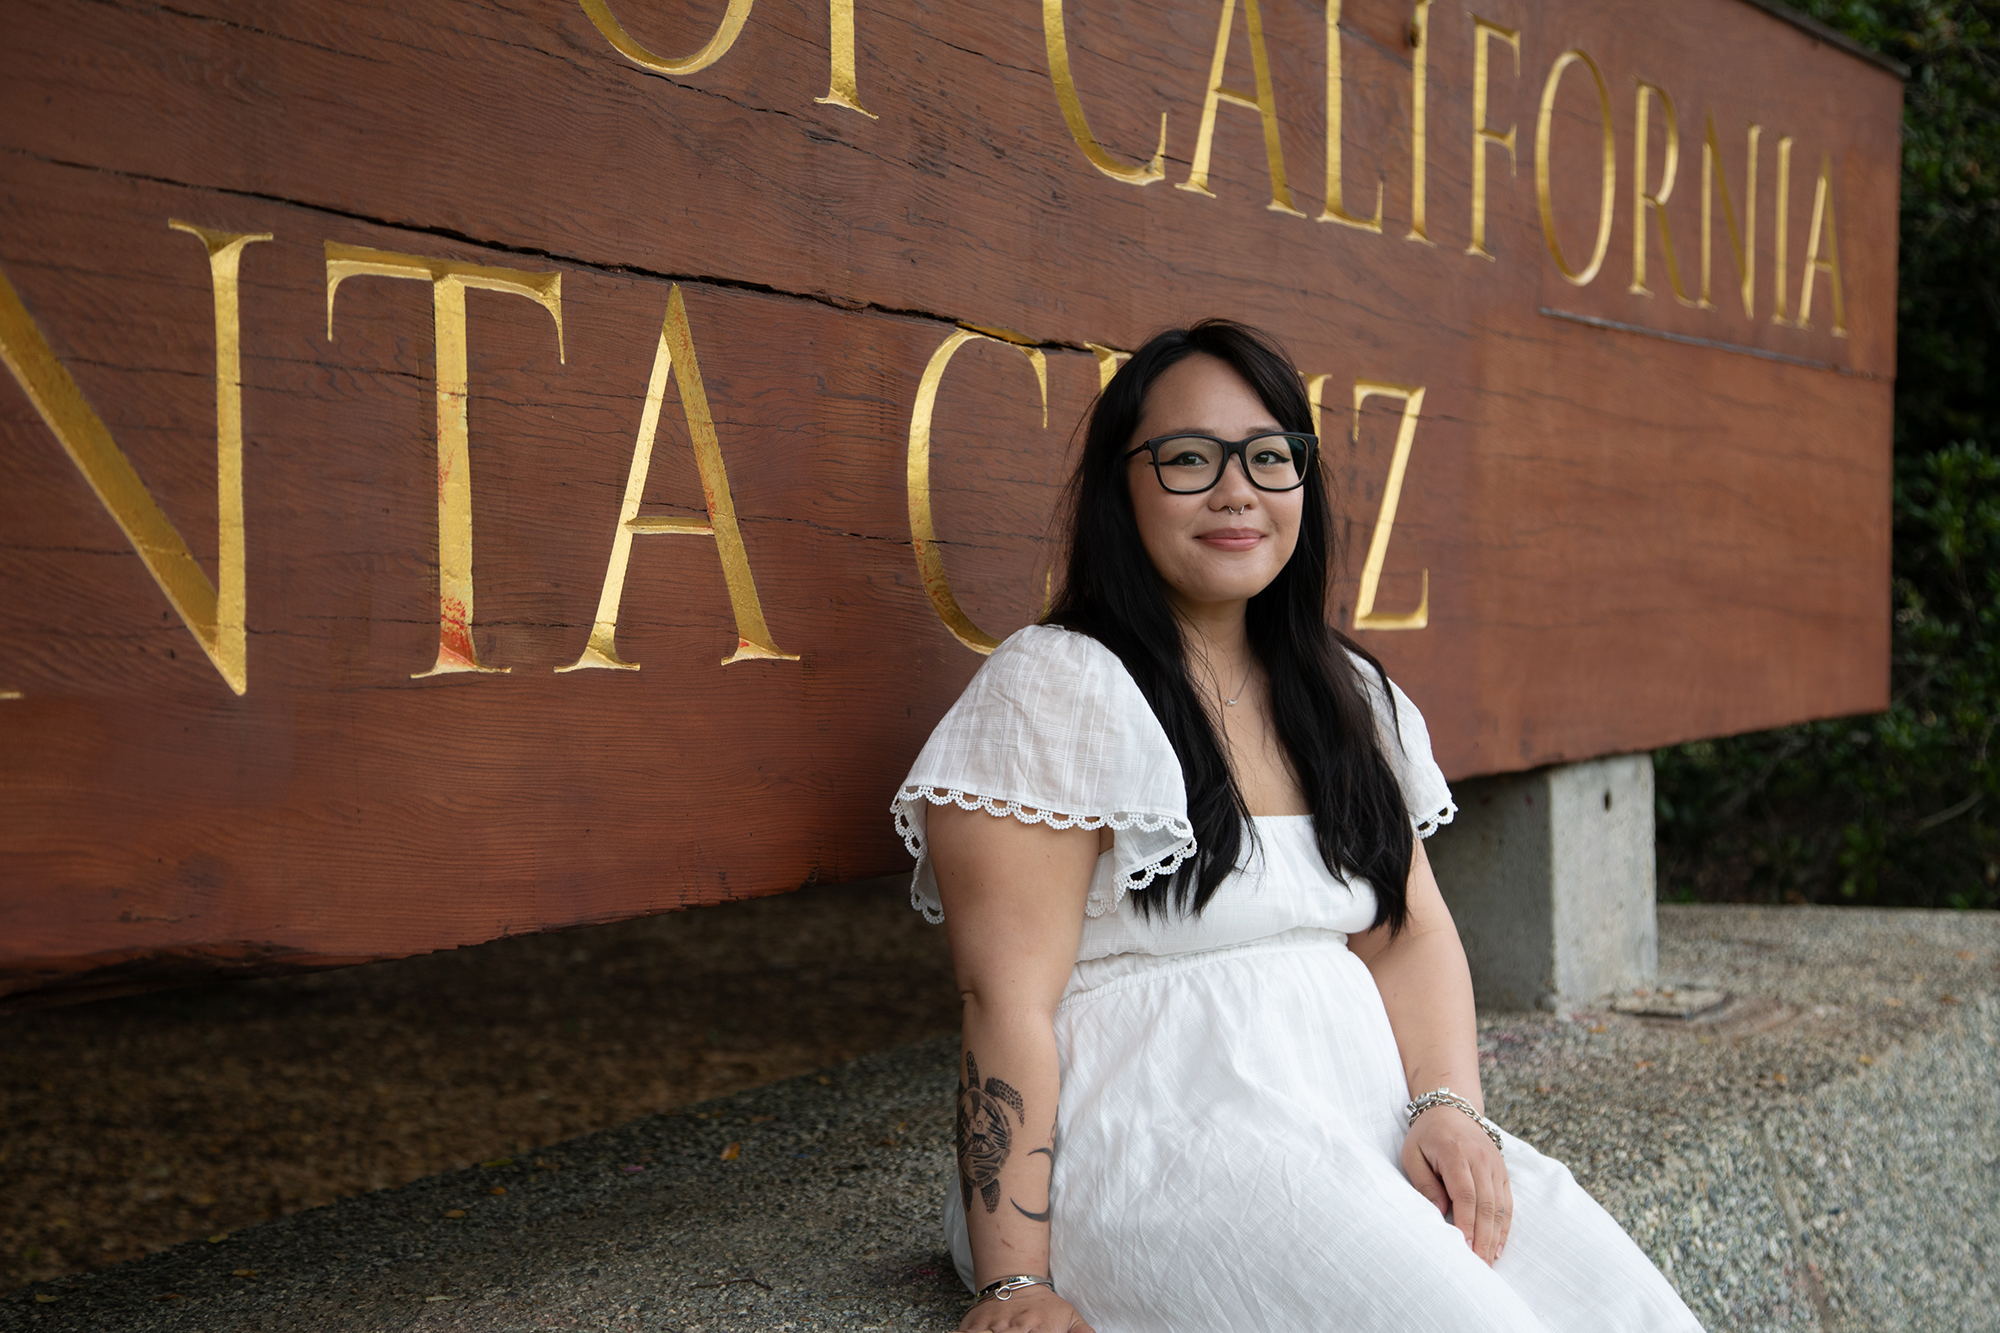 Young woman with long hair, glasses and white dress sits in front of a large wooden University of California Santa Cruz sign